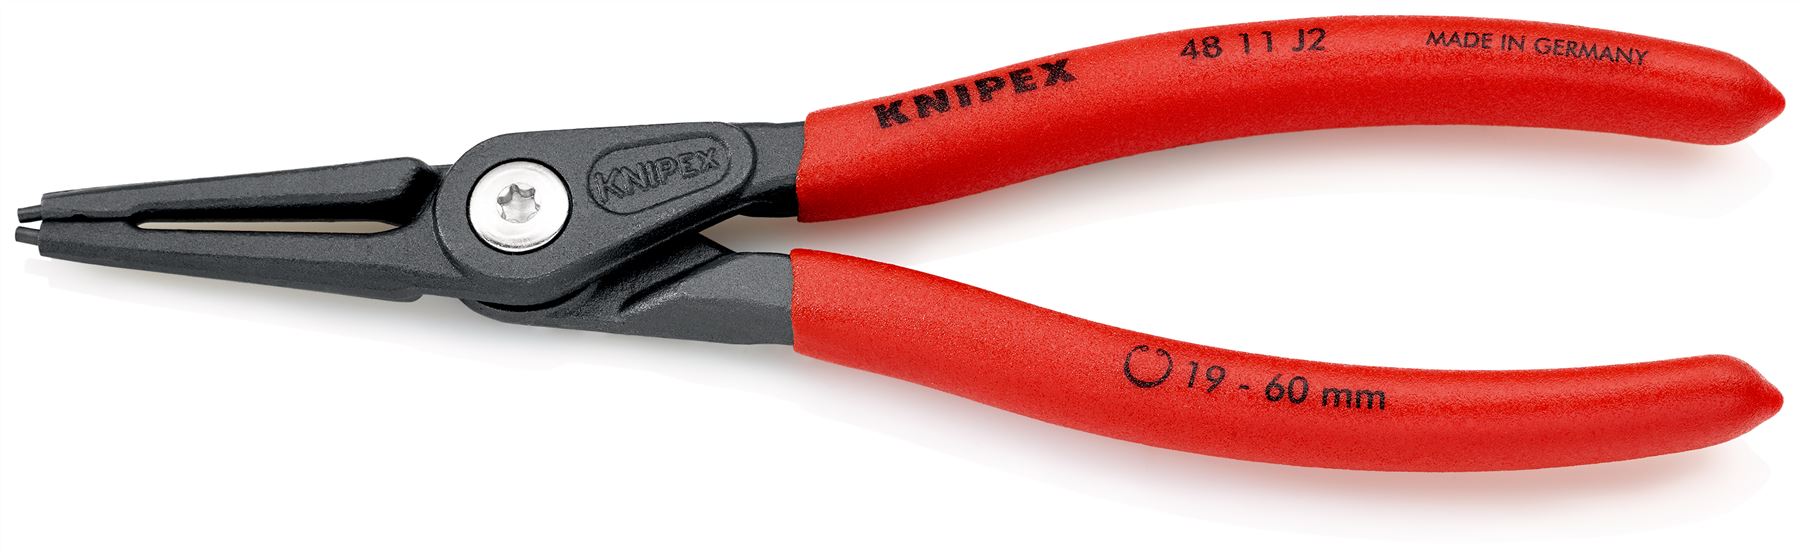 KNIPEX Precision Circlip Pliers for Internal Circlips in Bore Holes 180mm 1.8mm Diameter Tips 40 11 J2